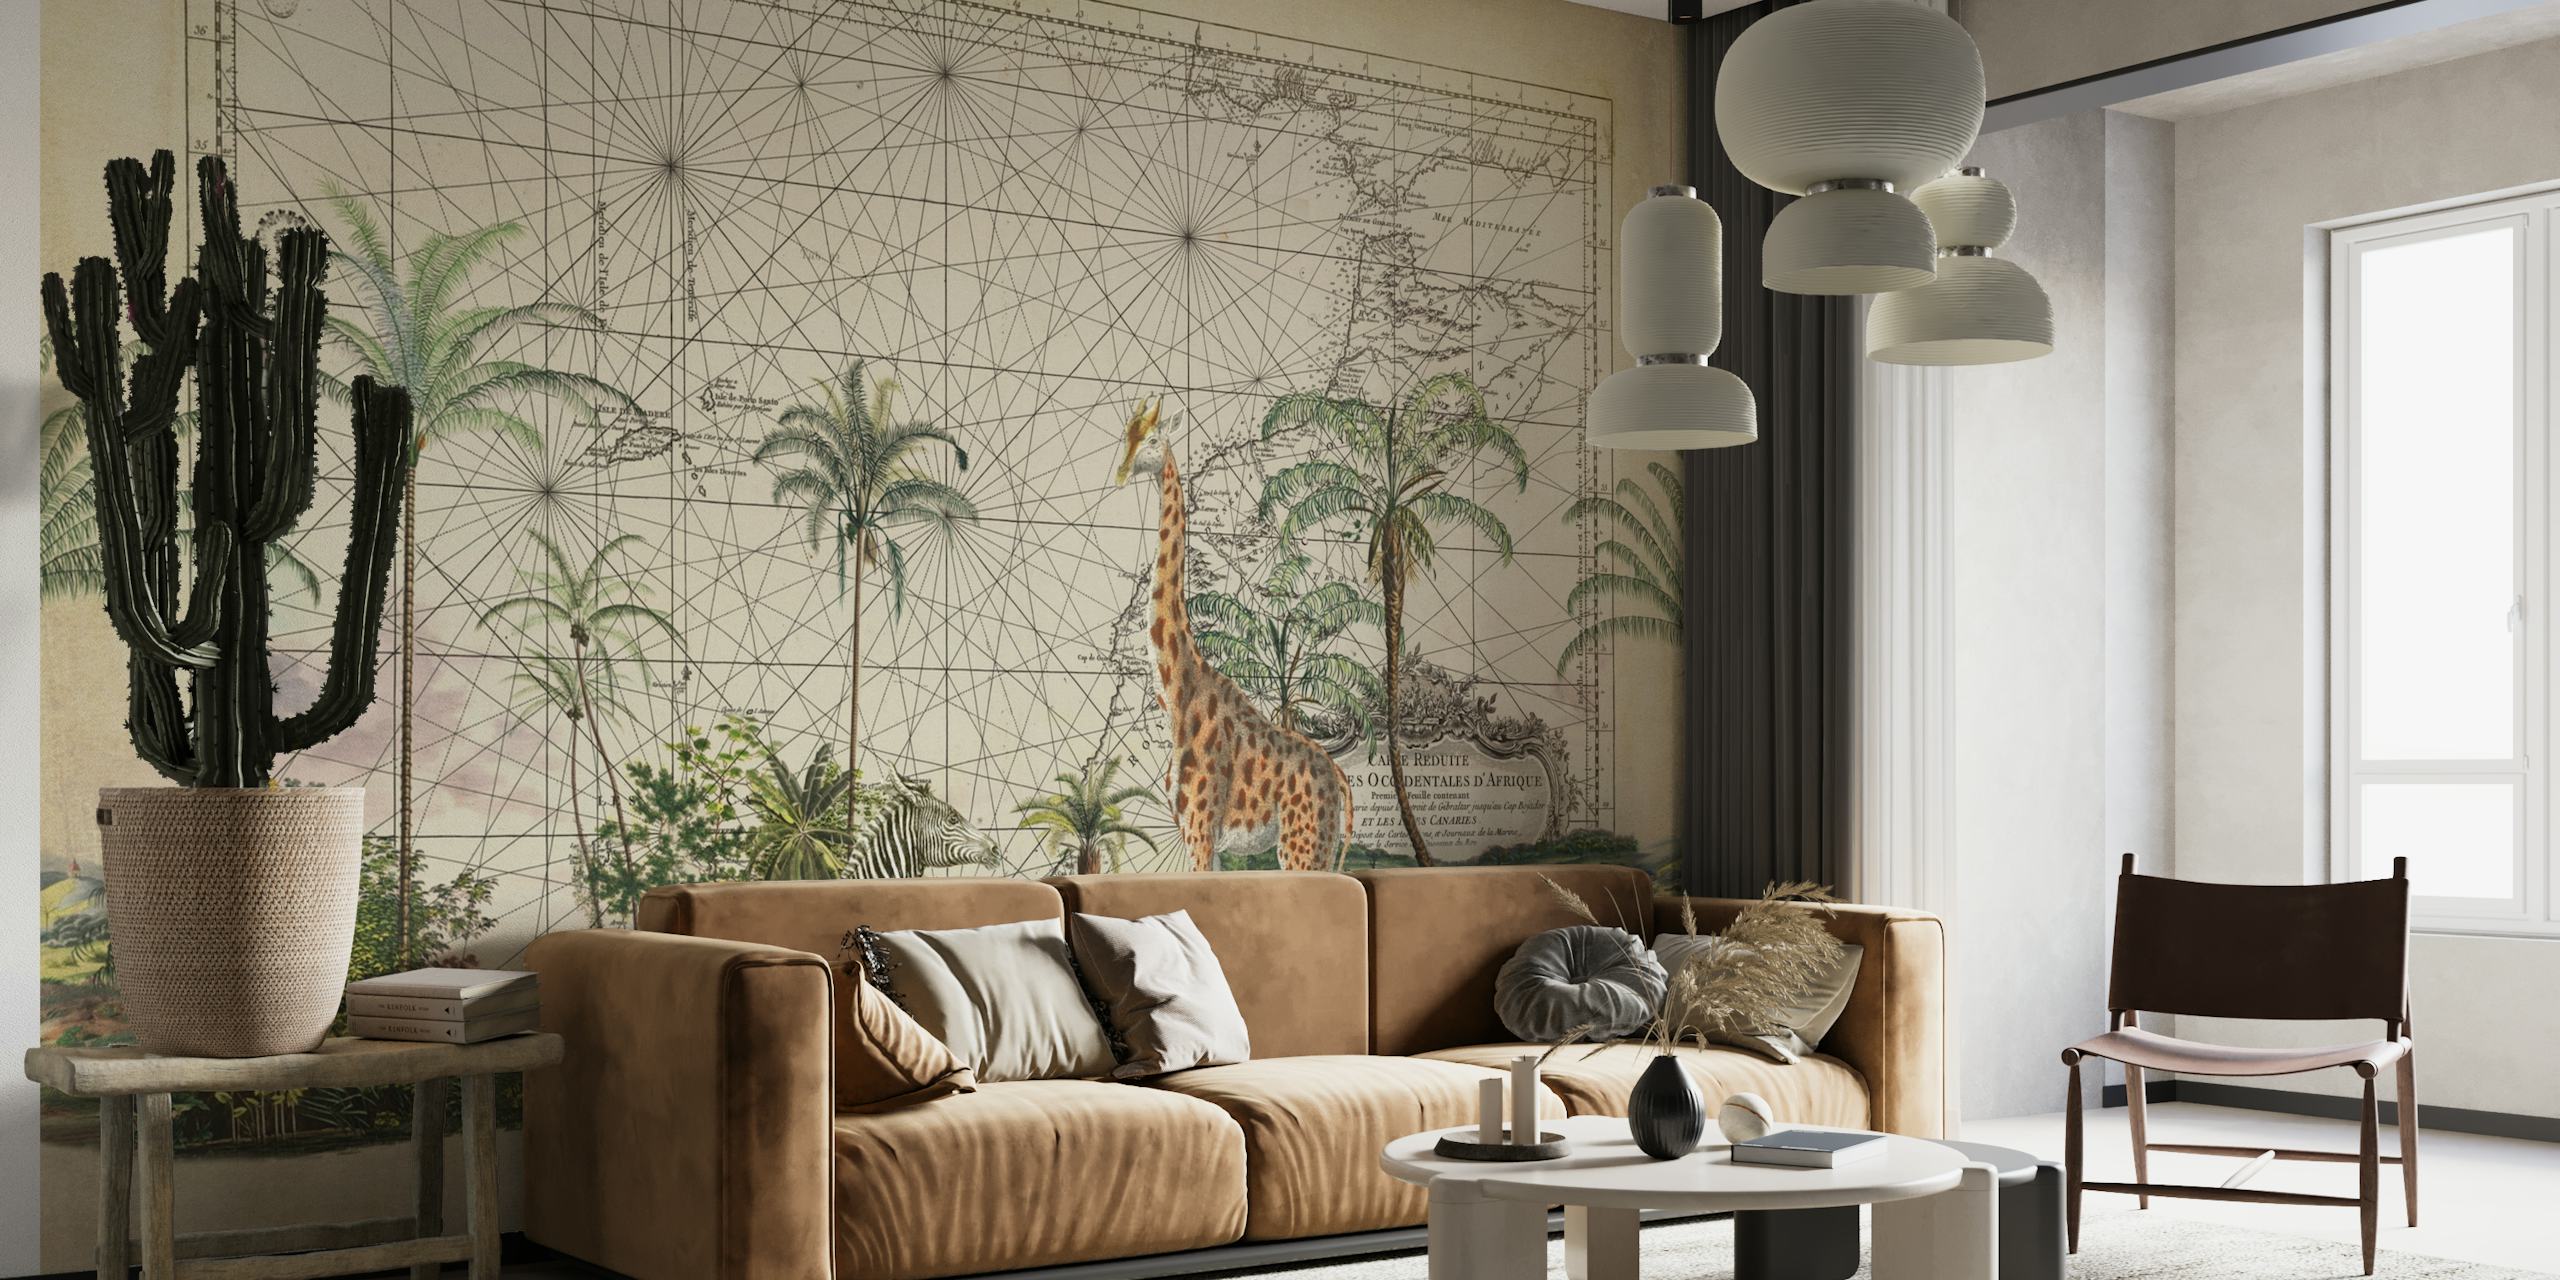 Explore Africa wall mural featuring giraffe, zebra, palm trees, and vintage map